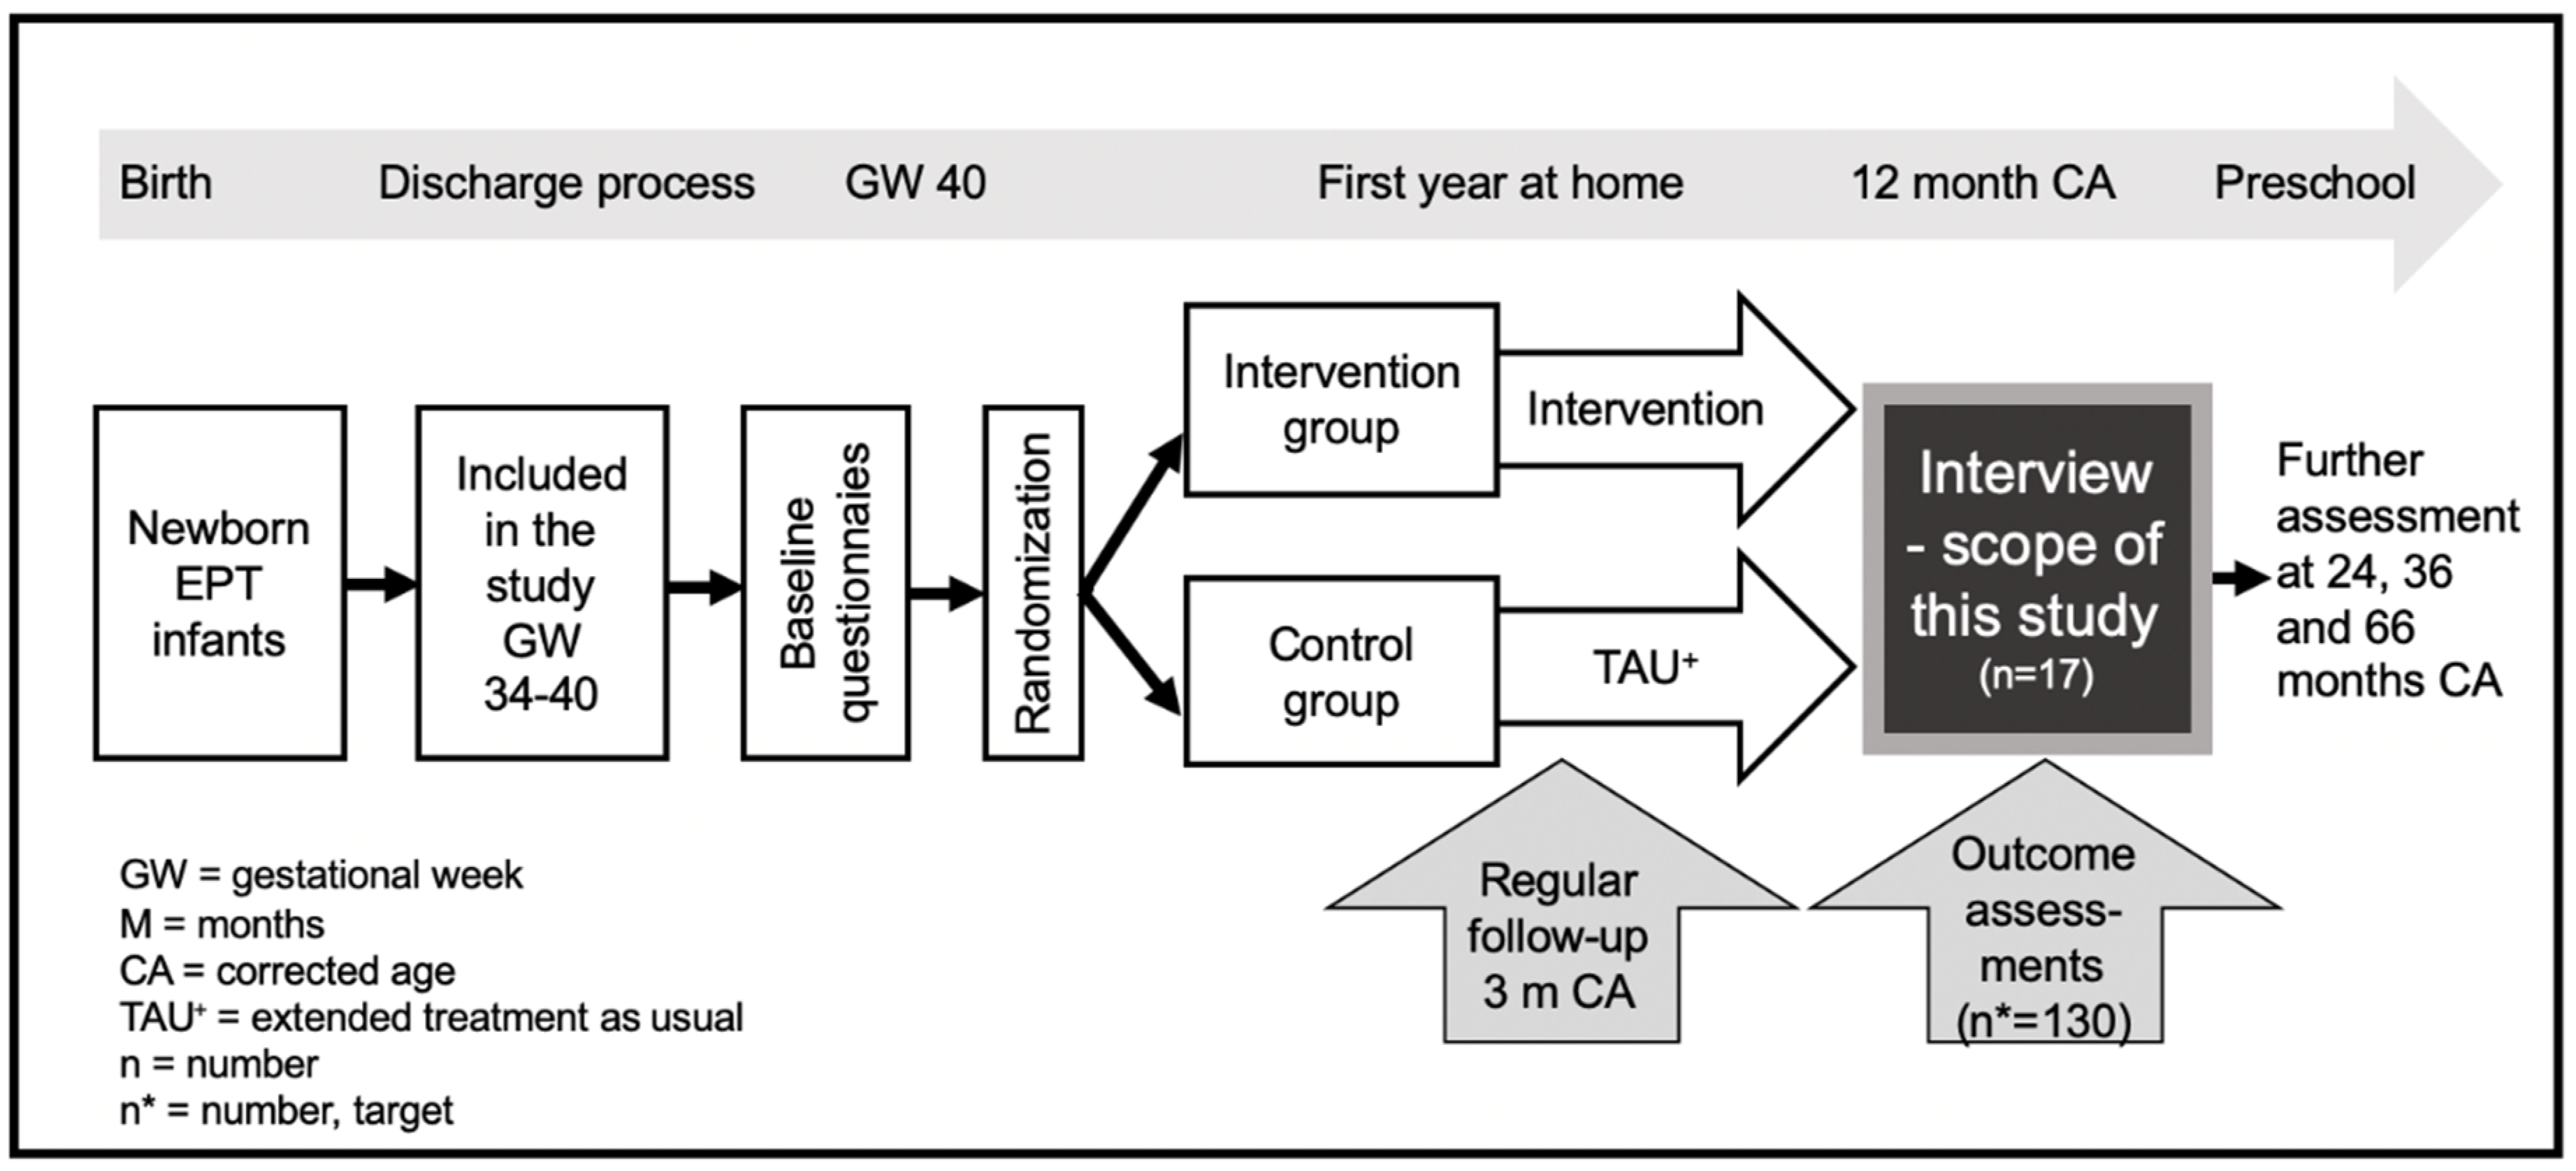 Mars bagagerum nøgen IJERPH | Free Full-Text | Parents' Experiences of the First Year at Home  with an Infant Born Extremely Preterm with and without Post-Discharge  Intervention: Ambivalence, Loneliness, and Relationship Impact | HTML